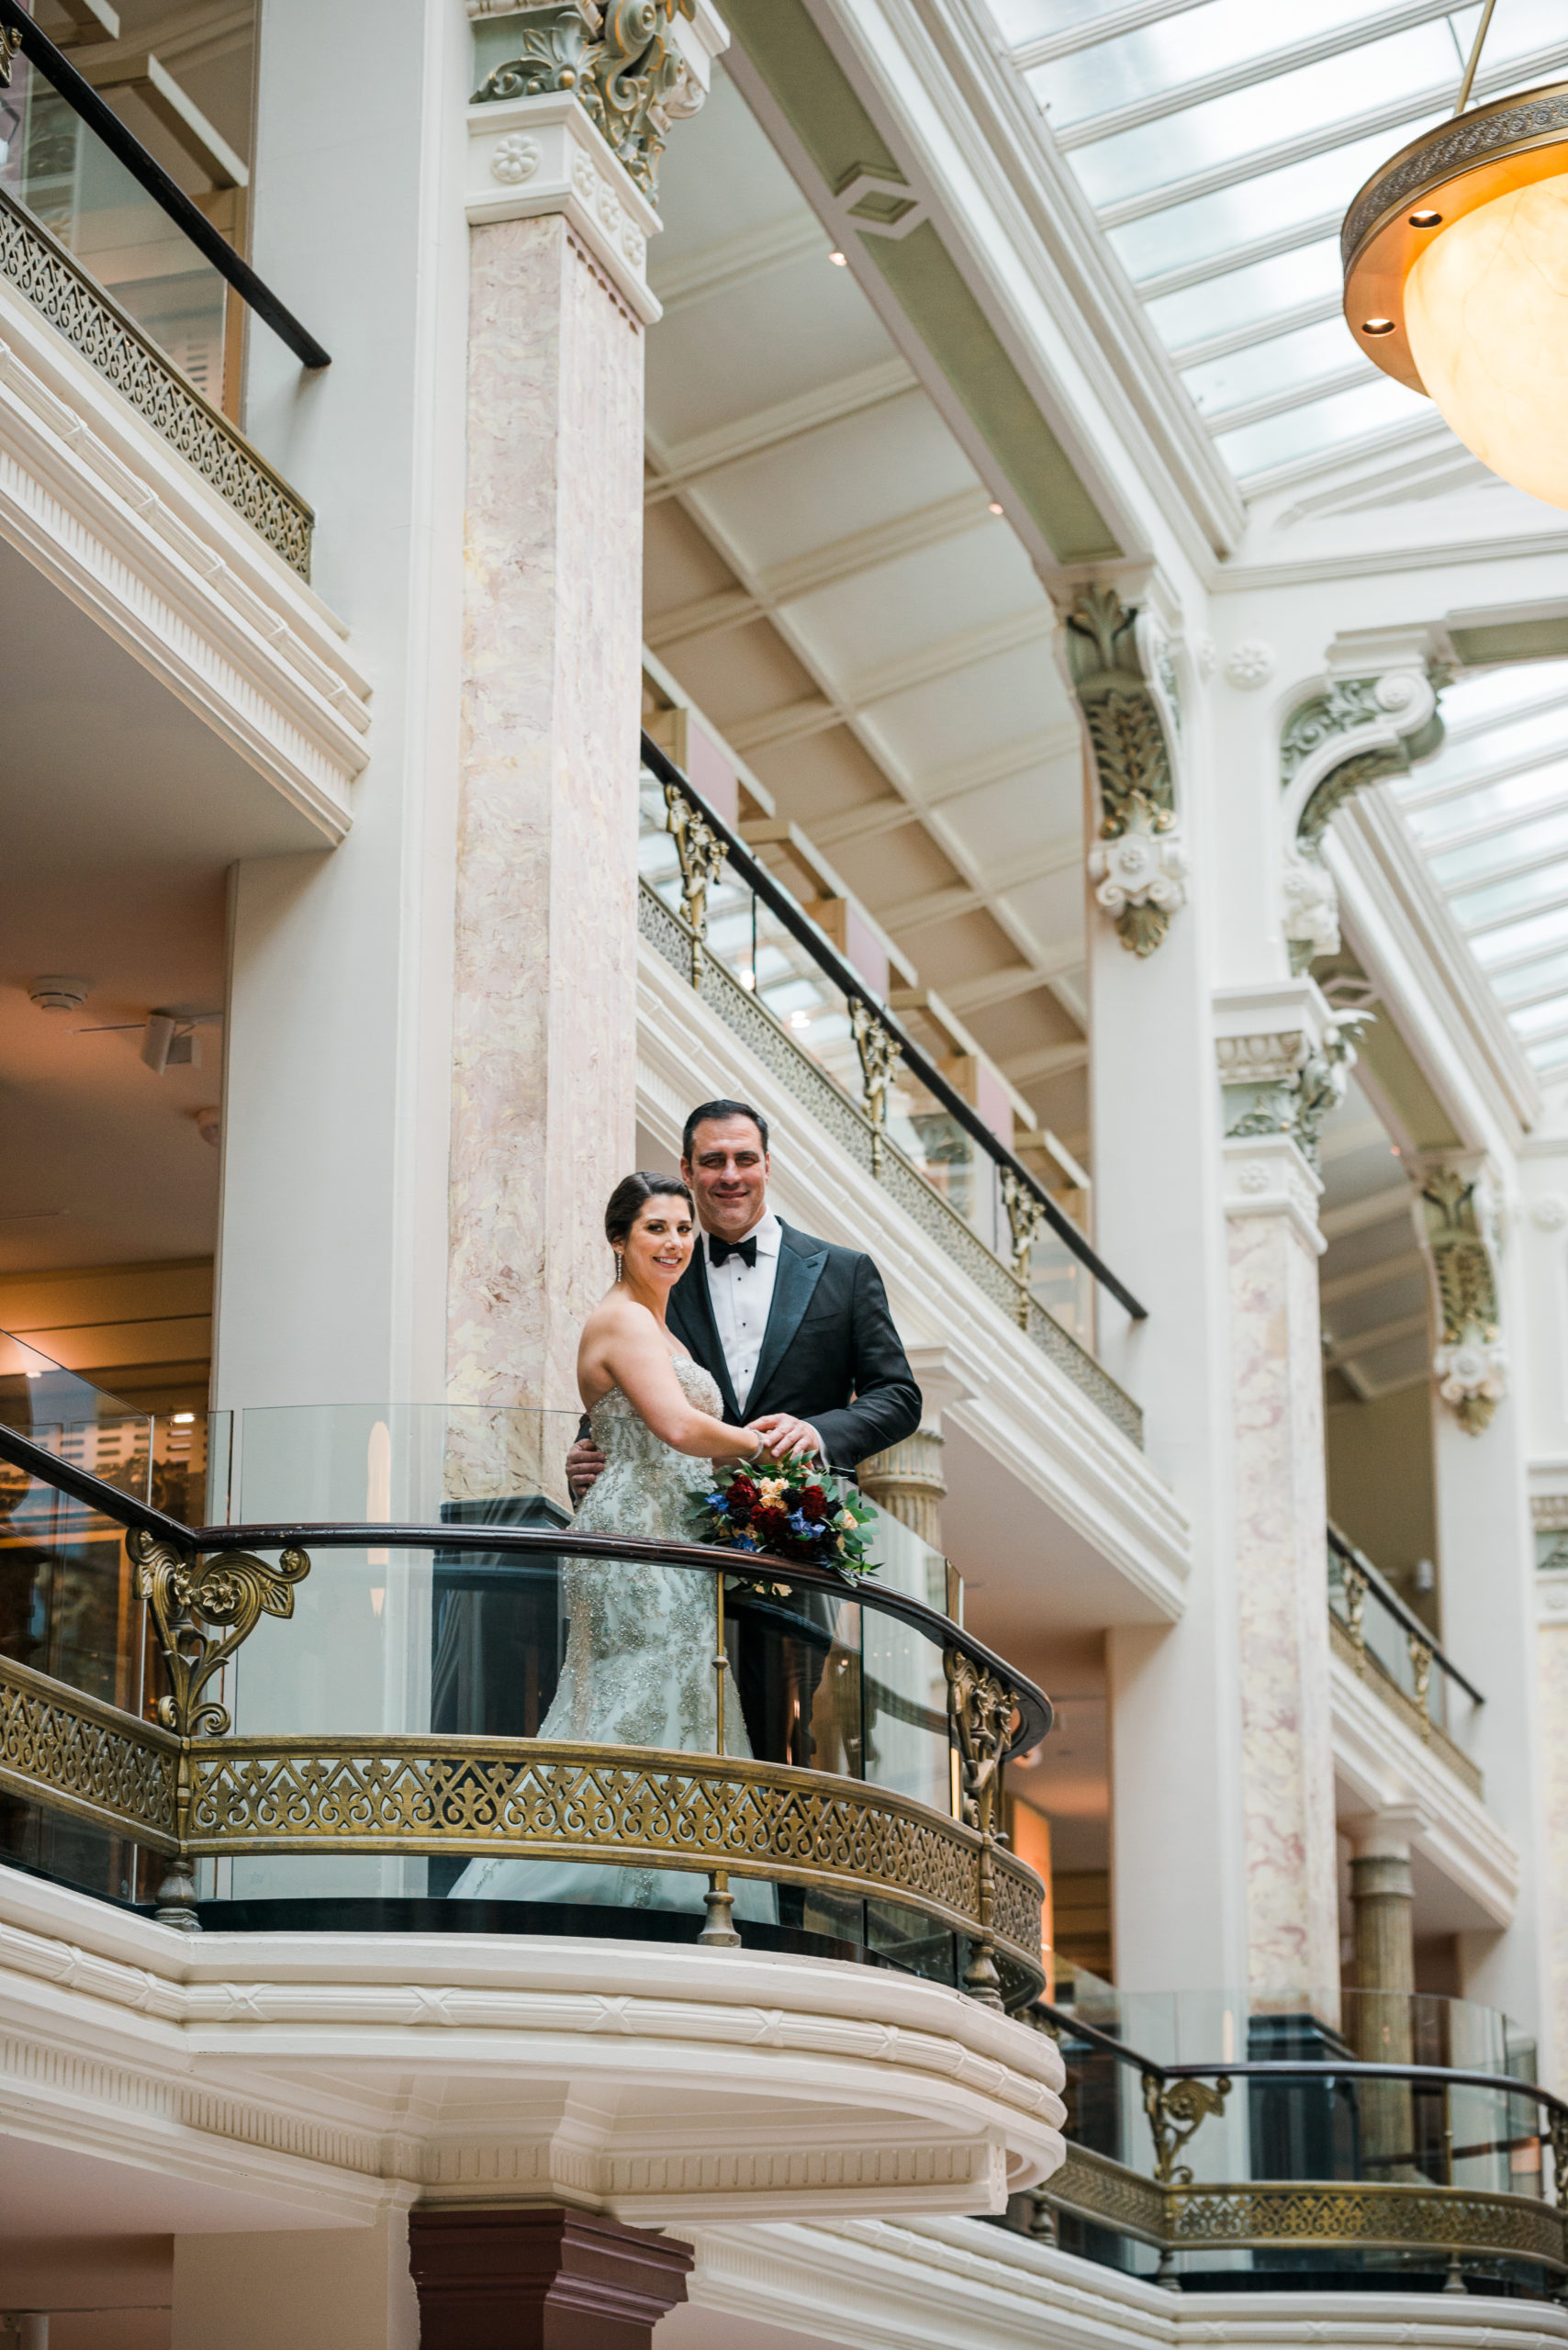 The bride and groom posing on a balcony at the Marriot Marquis hotel in Washington DC